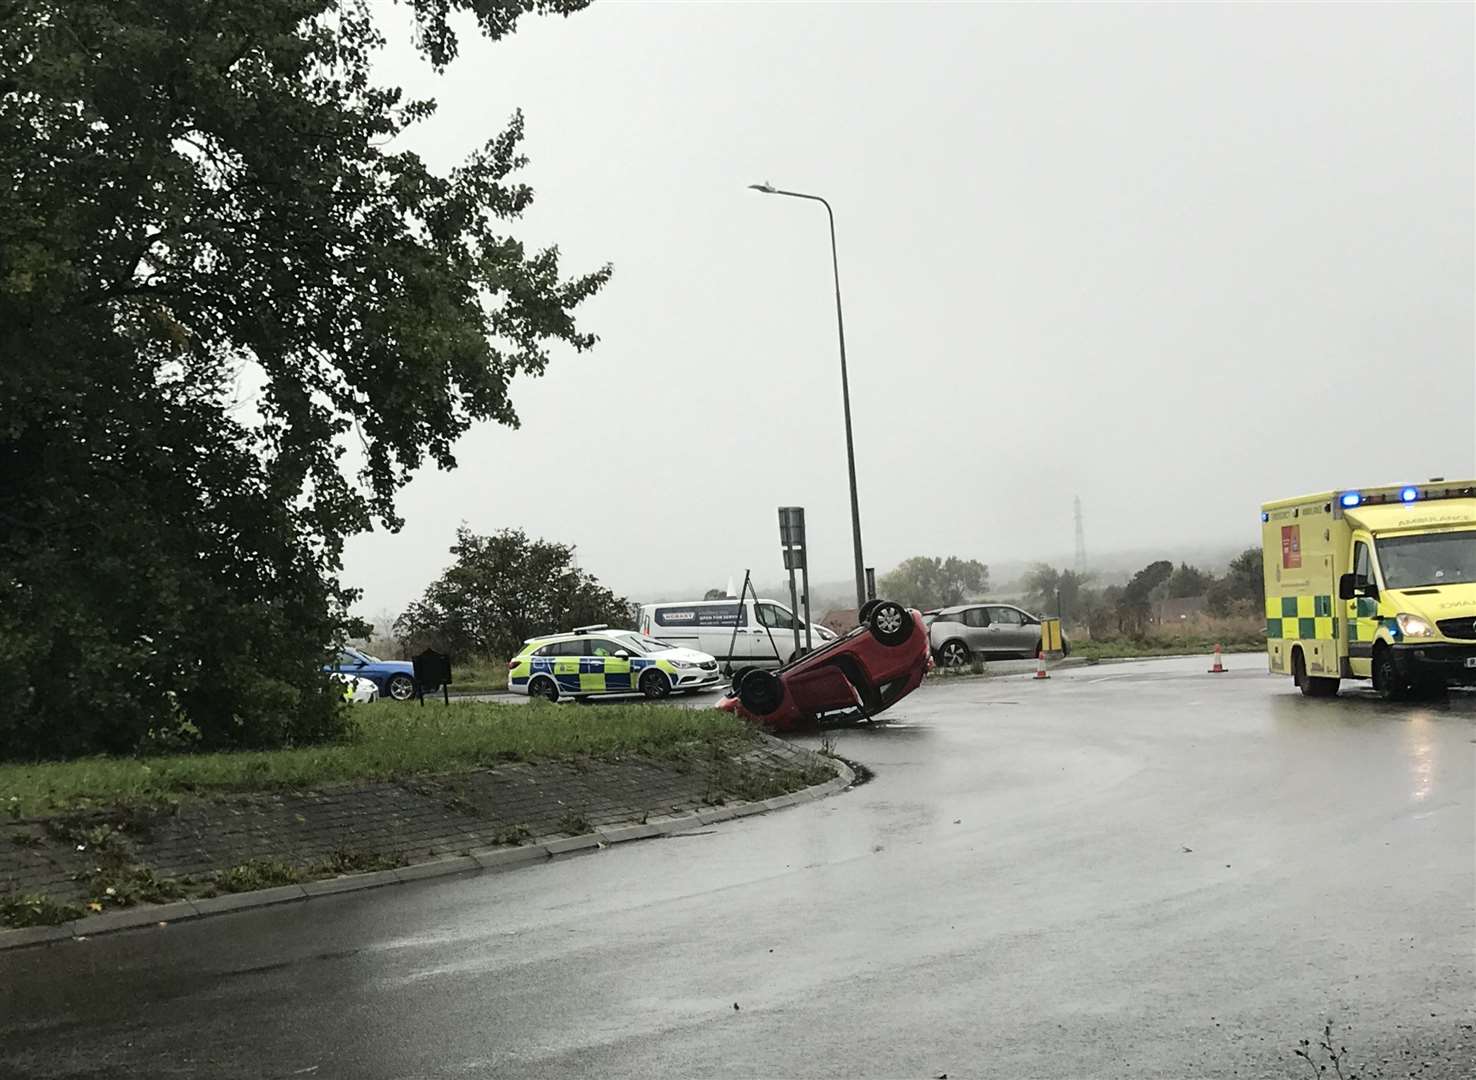 A car has crashed on the roundabout by the A299 by Monkton. (19802503)